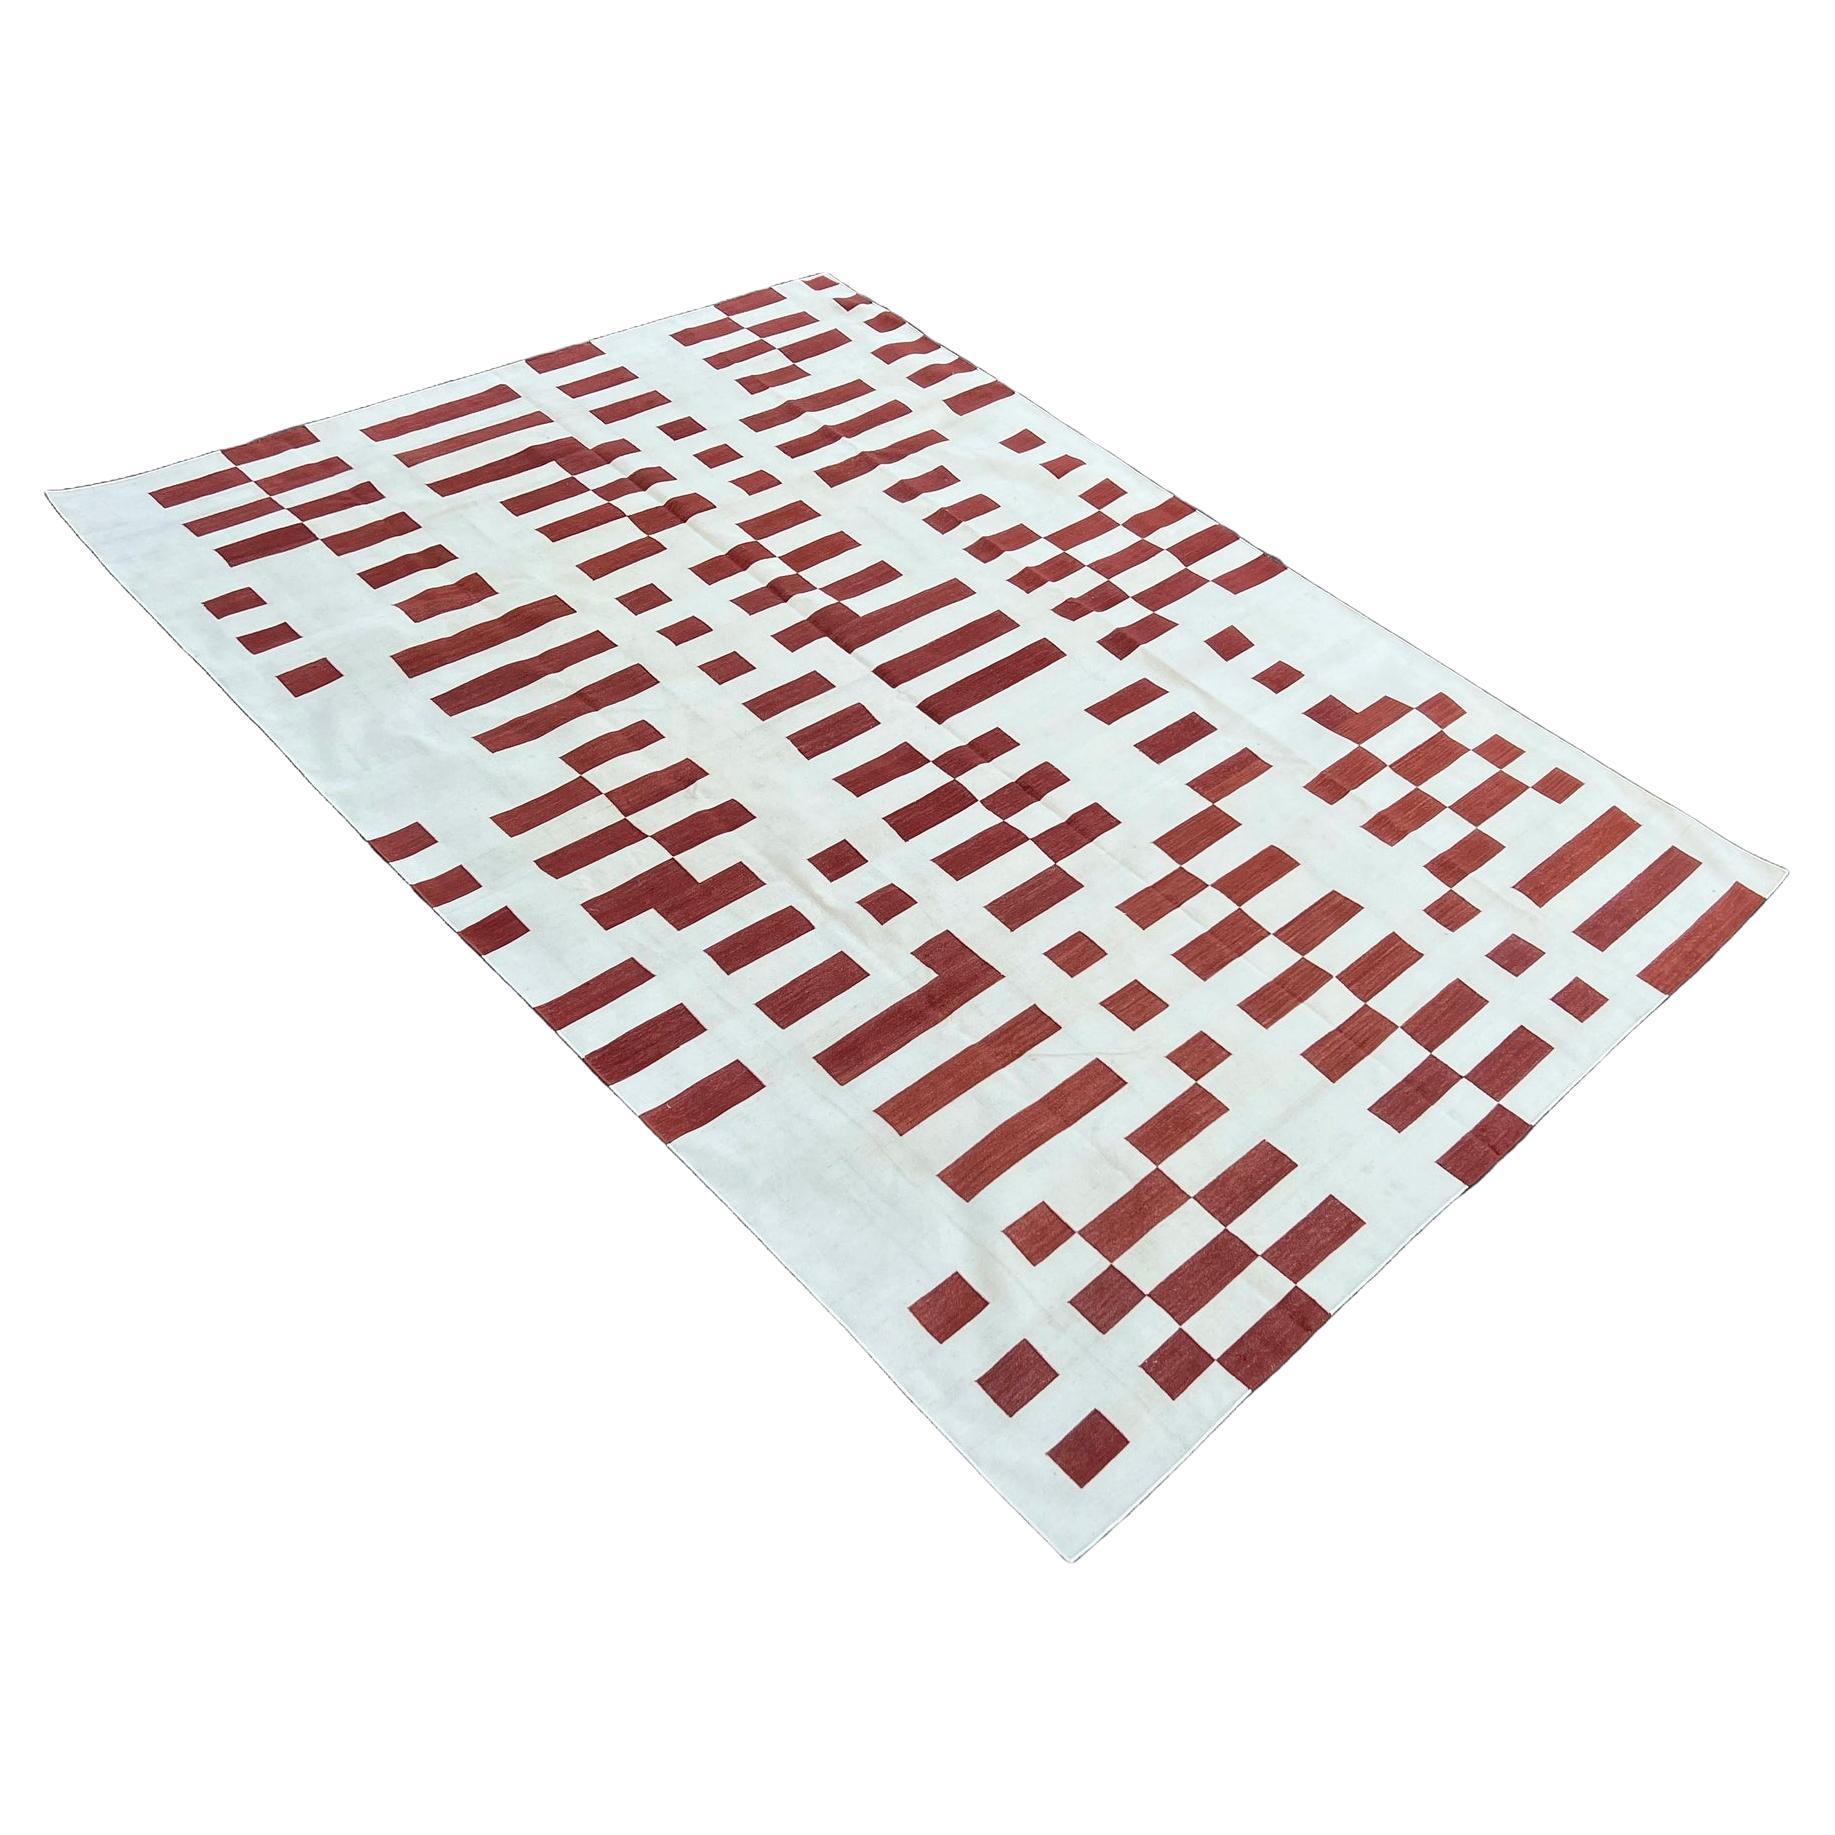 Cotton Vegetable Dyed Red And White Striped Indian Dhurrie Rug-8'x10' 
These special flat-weave dhurries are hand-woven with 15 ply 100% cotton yarn. Due to the special manufacturing techniques used to create our rugs, the size and color of each